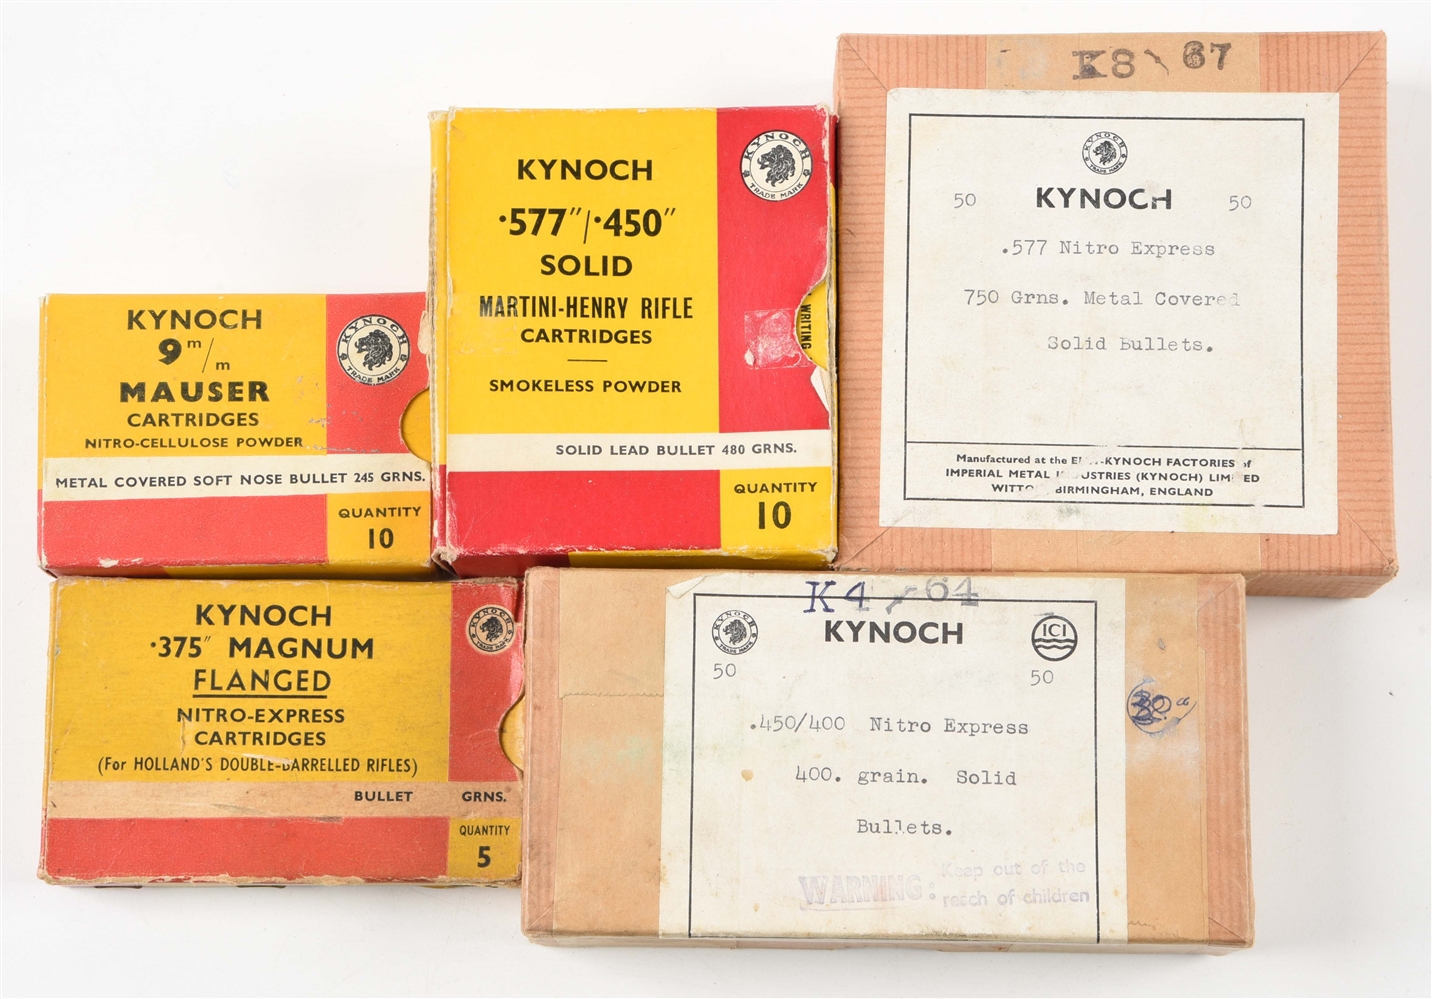 LOT OF 5: BOXES OF KYNOCH AMMUNITION AND PROJECTILES.